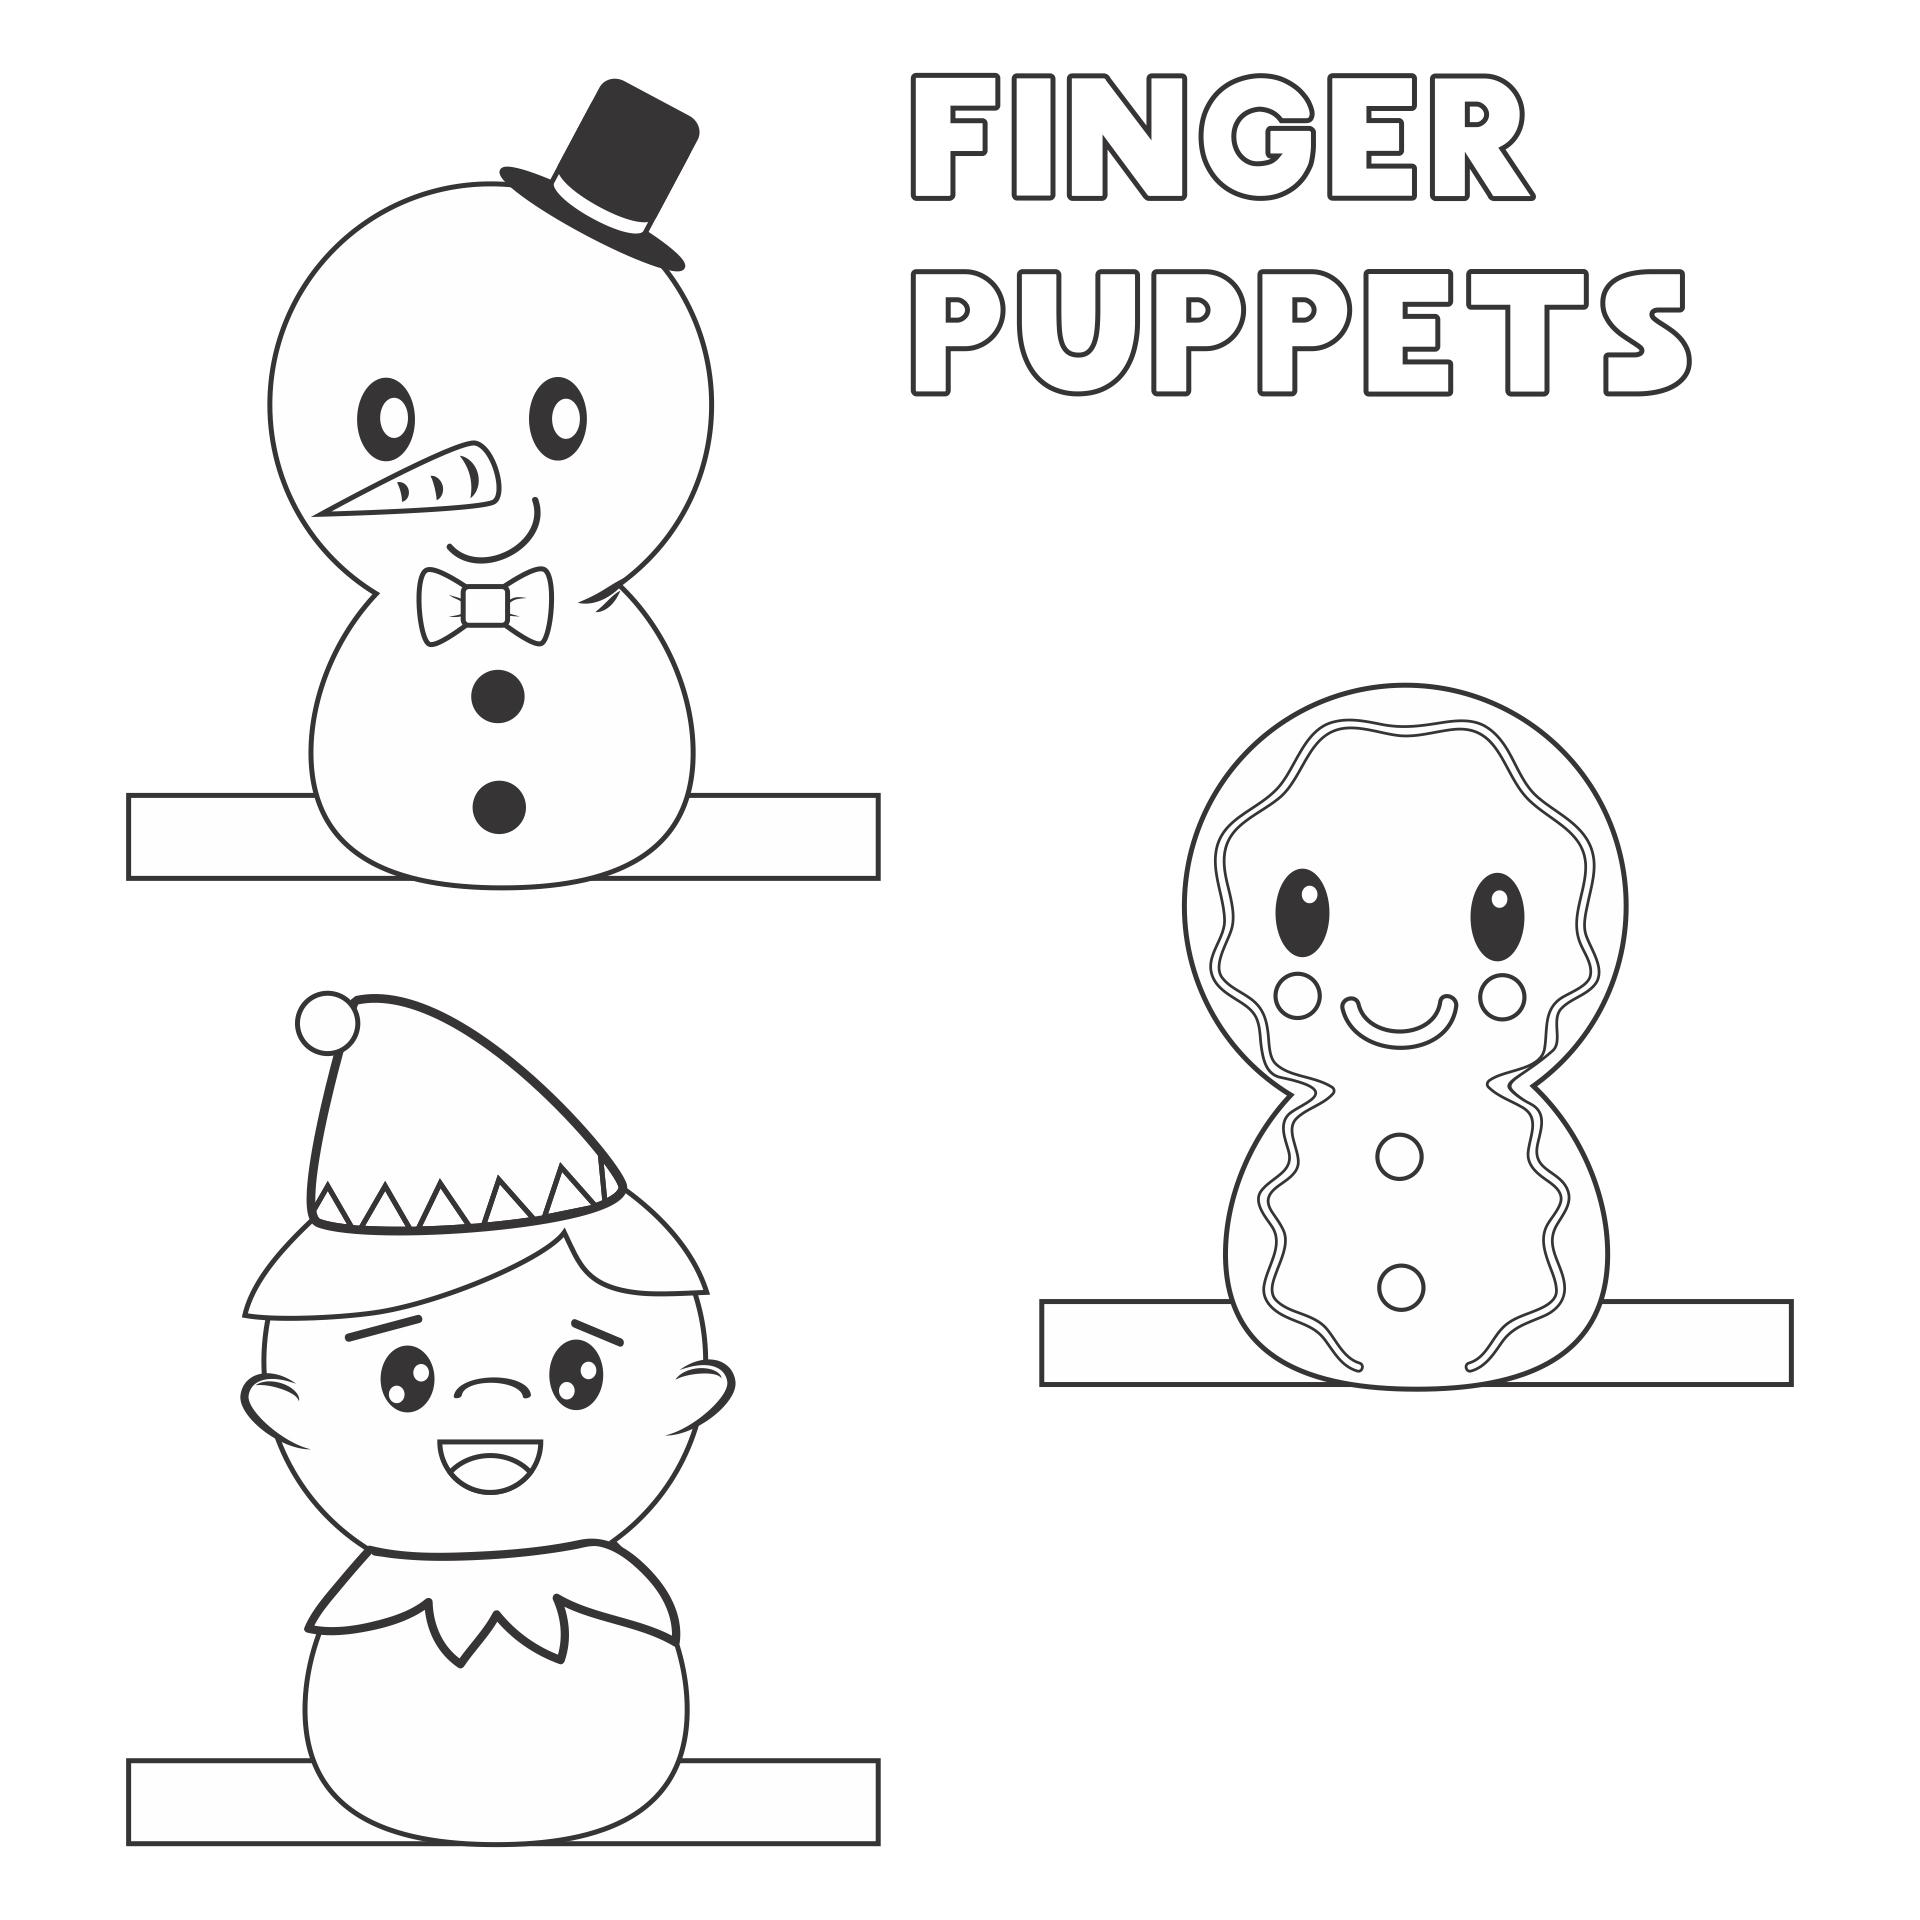 Christmas Printable Images Gallery Category Page 13 Printablee